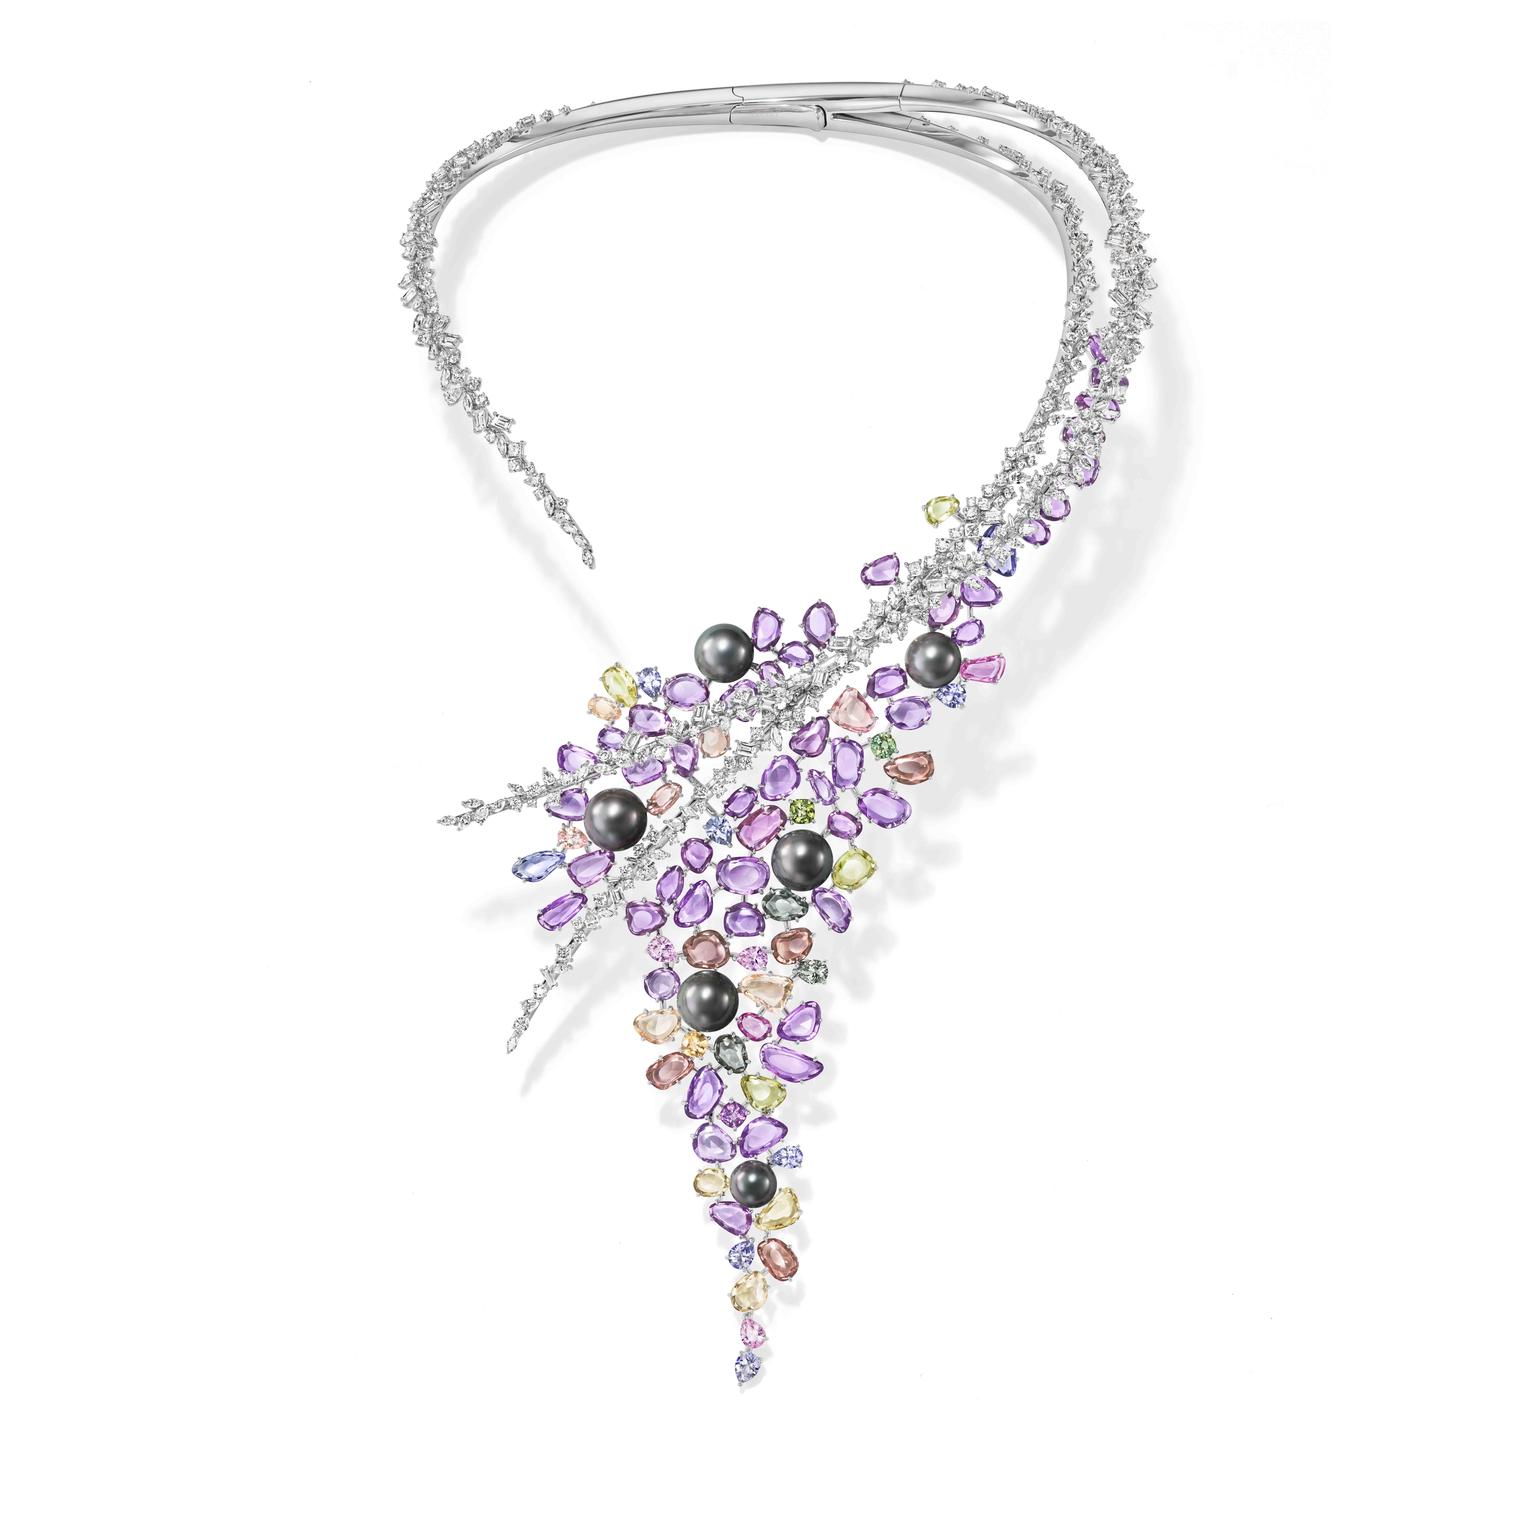 The Flowers - N°5 Collection - High Jewelry